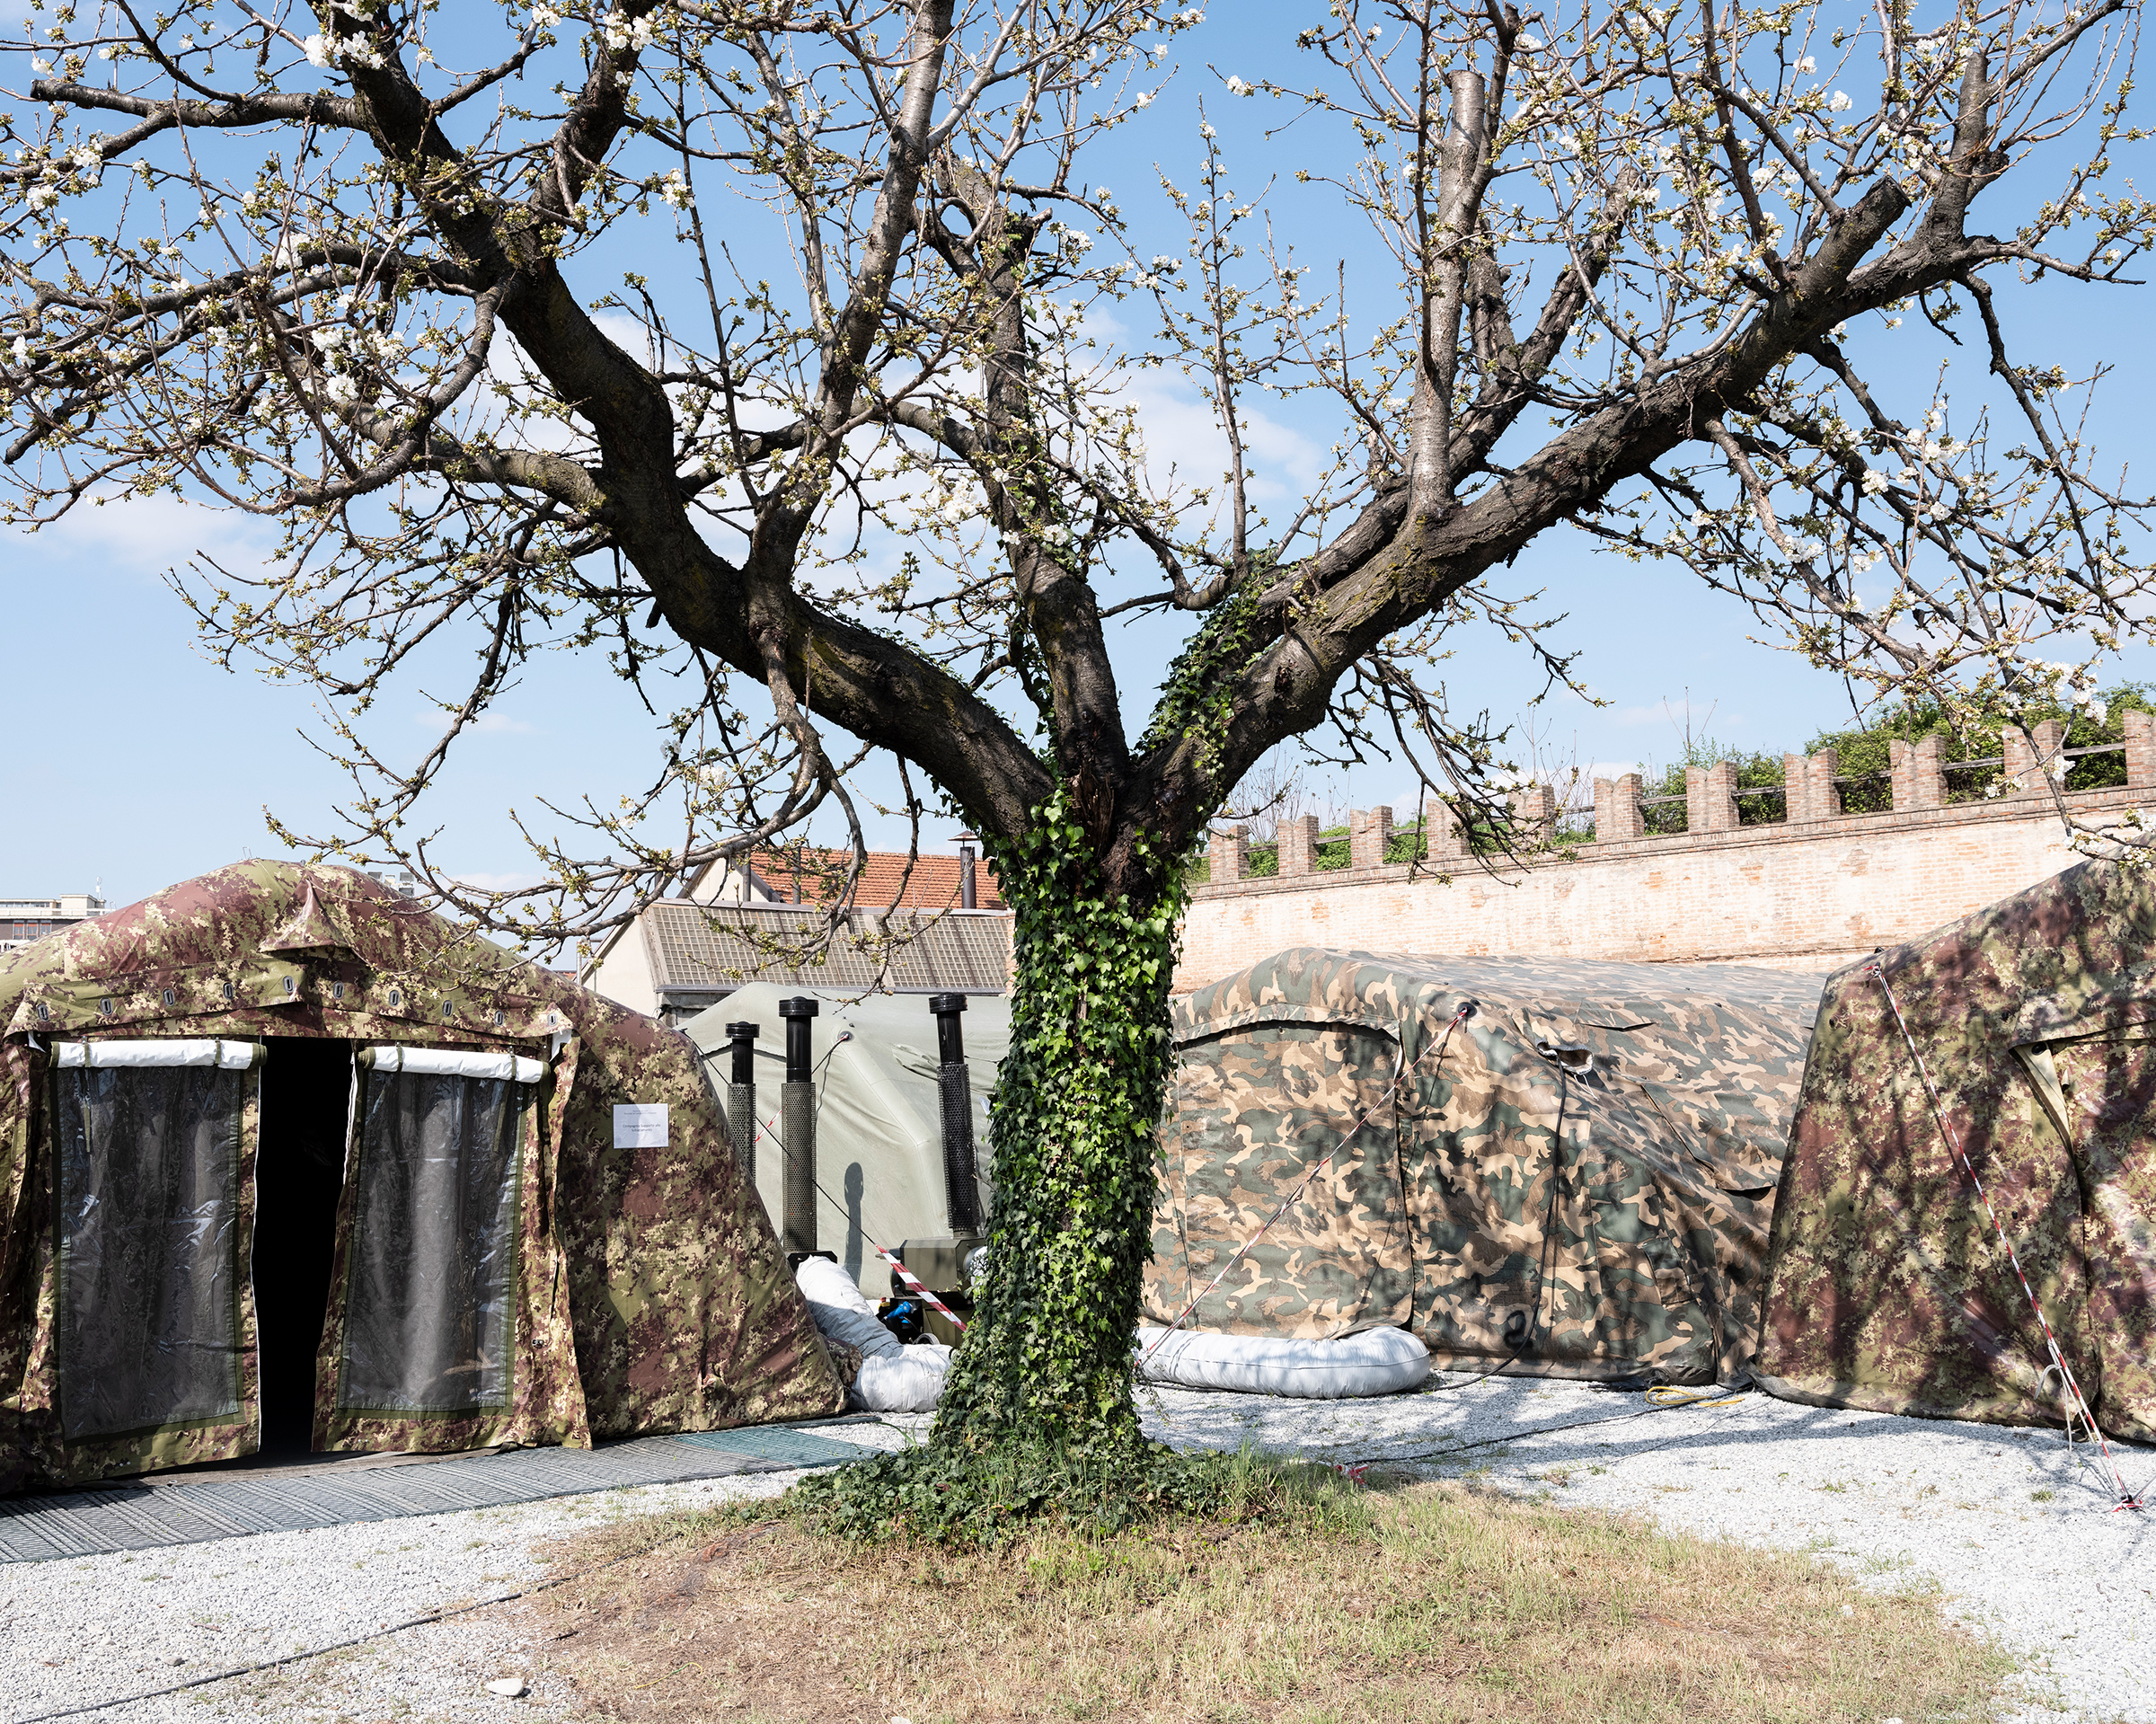 In Piacenza, a military field hospital was constructed to accommodate dozens of COVID-19 cases.